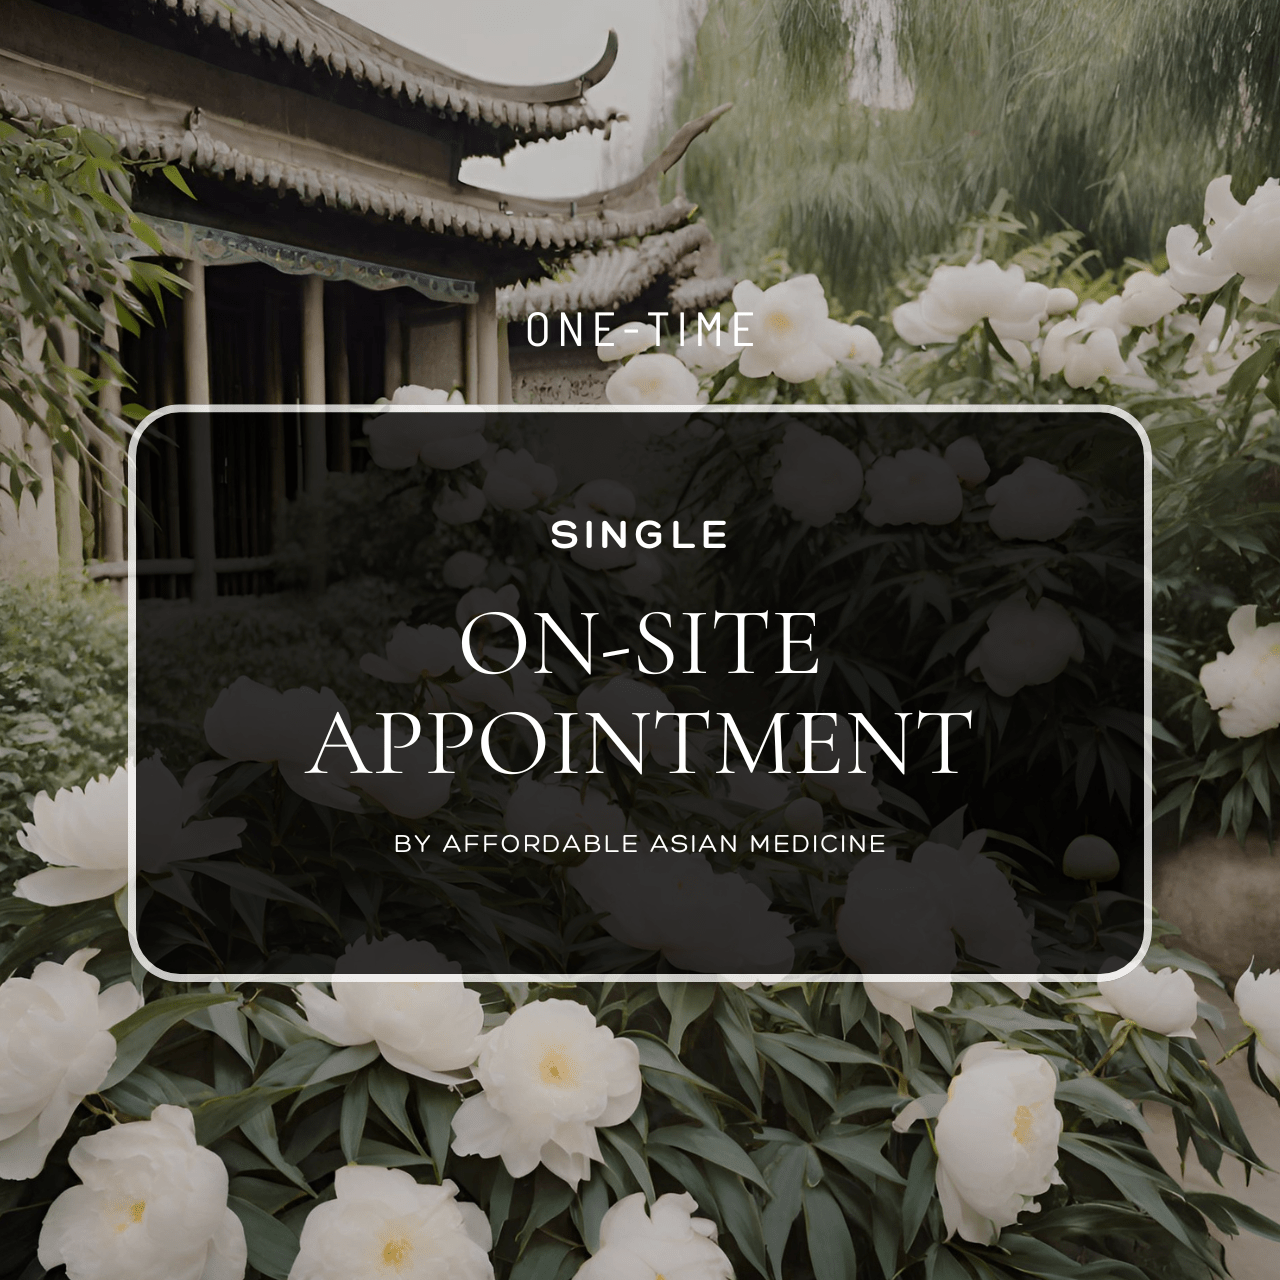 on-site appointment